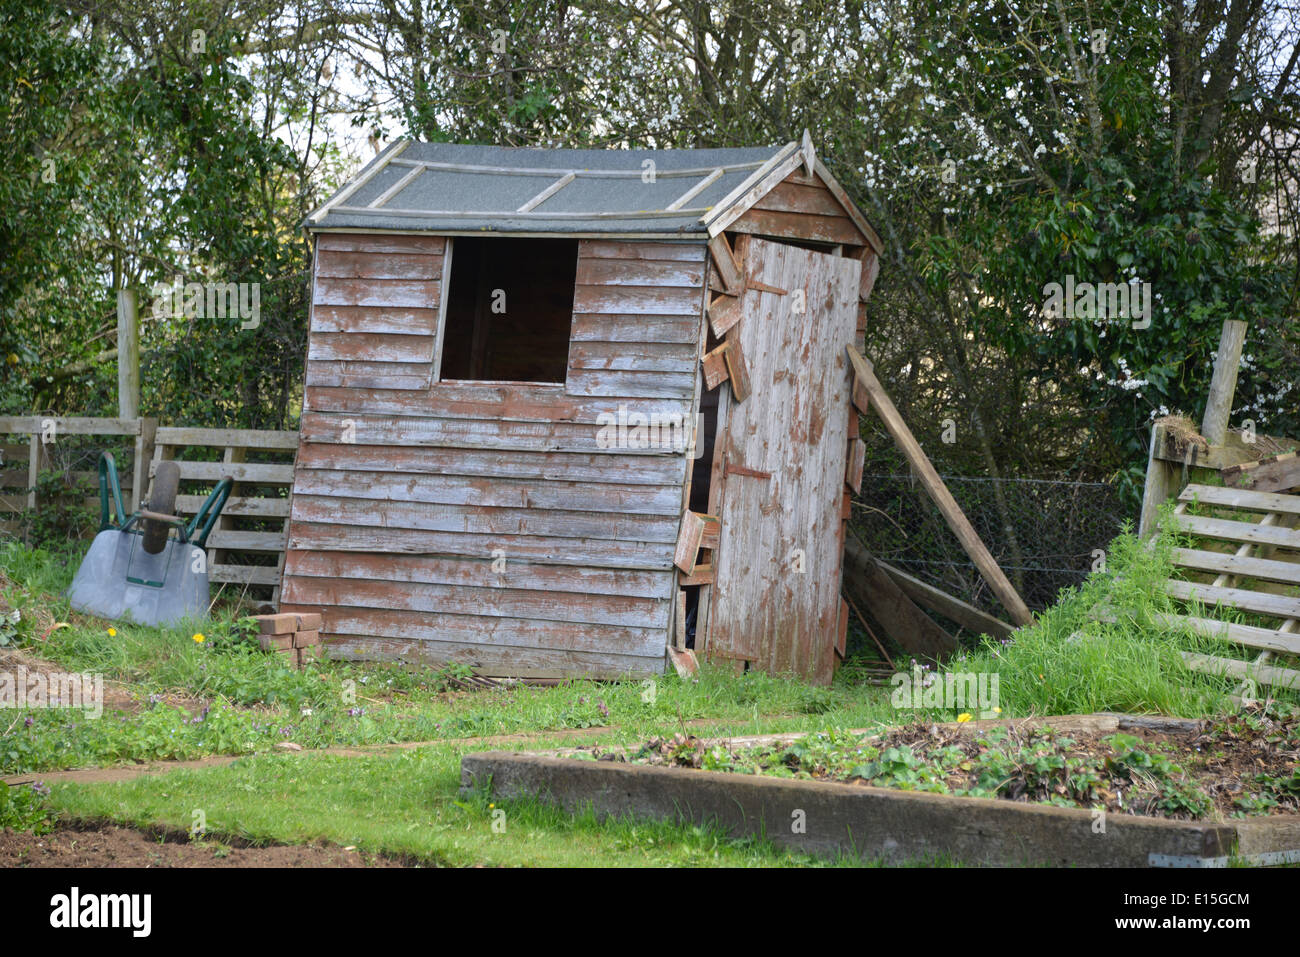 Old shed on allotment, Hook norton, Oxfordshire Stock Photo